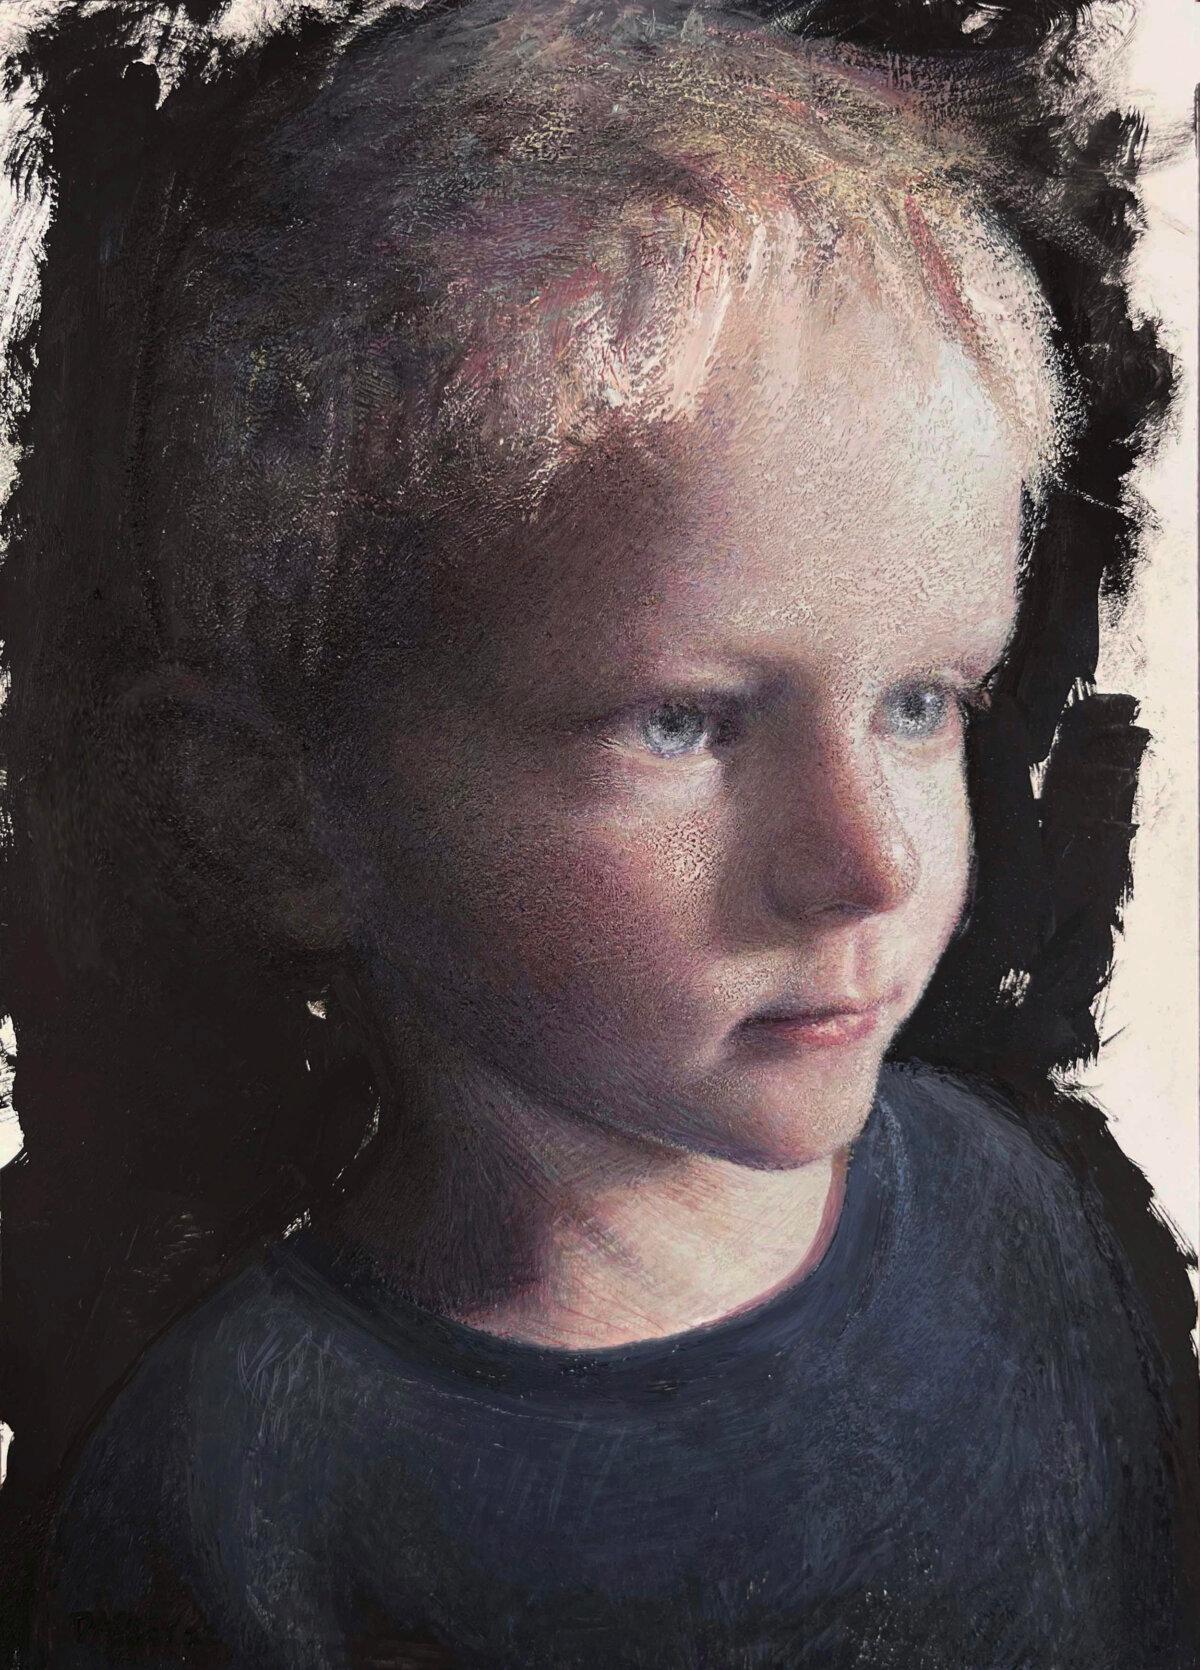 “Our Son Jack,” by John Darley. Egg tempera on panel; 7 inches by 5 inches. (Courtesy of John Darley)